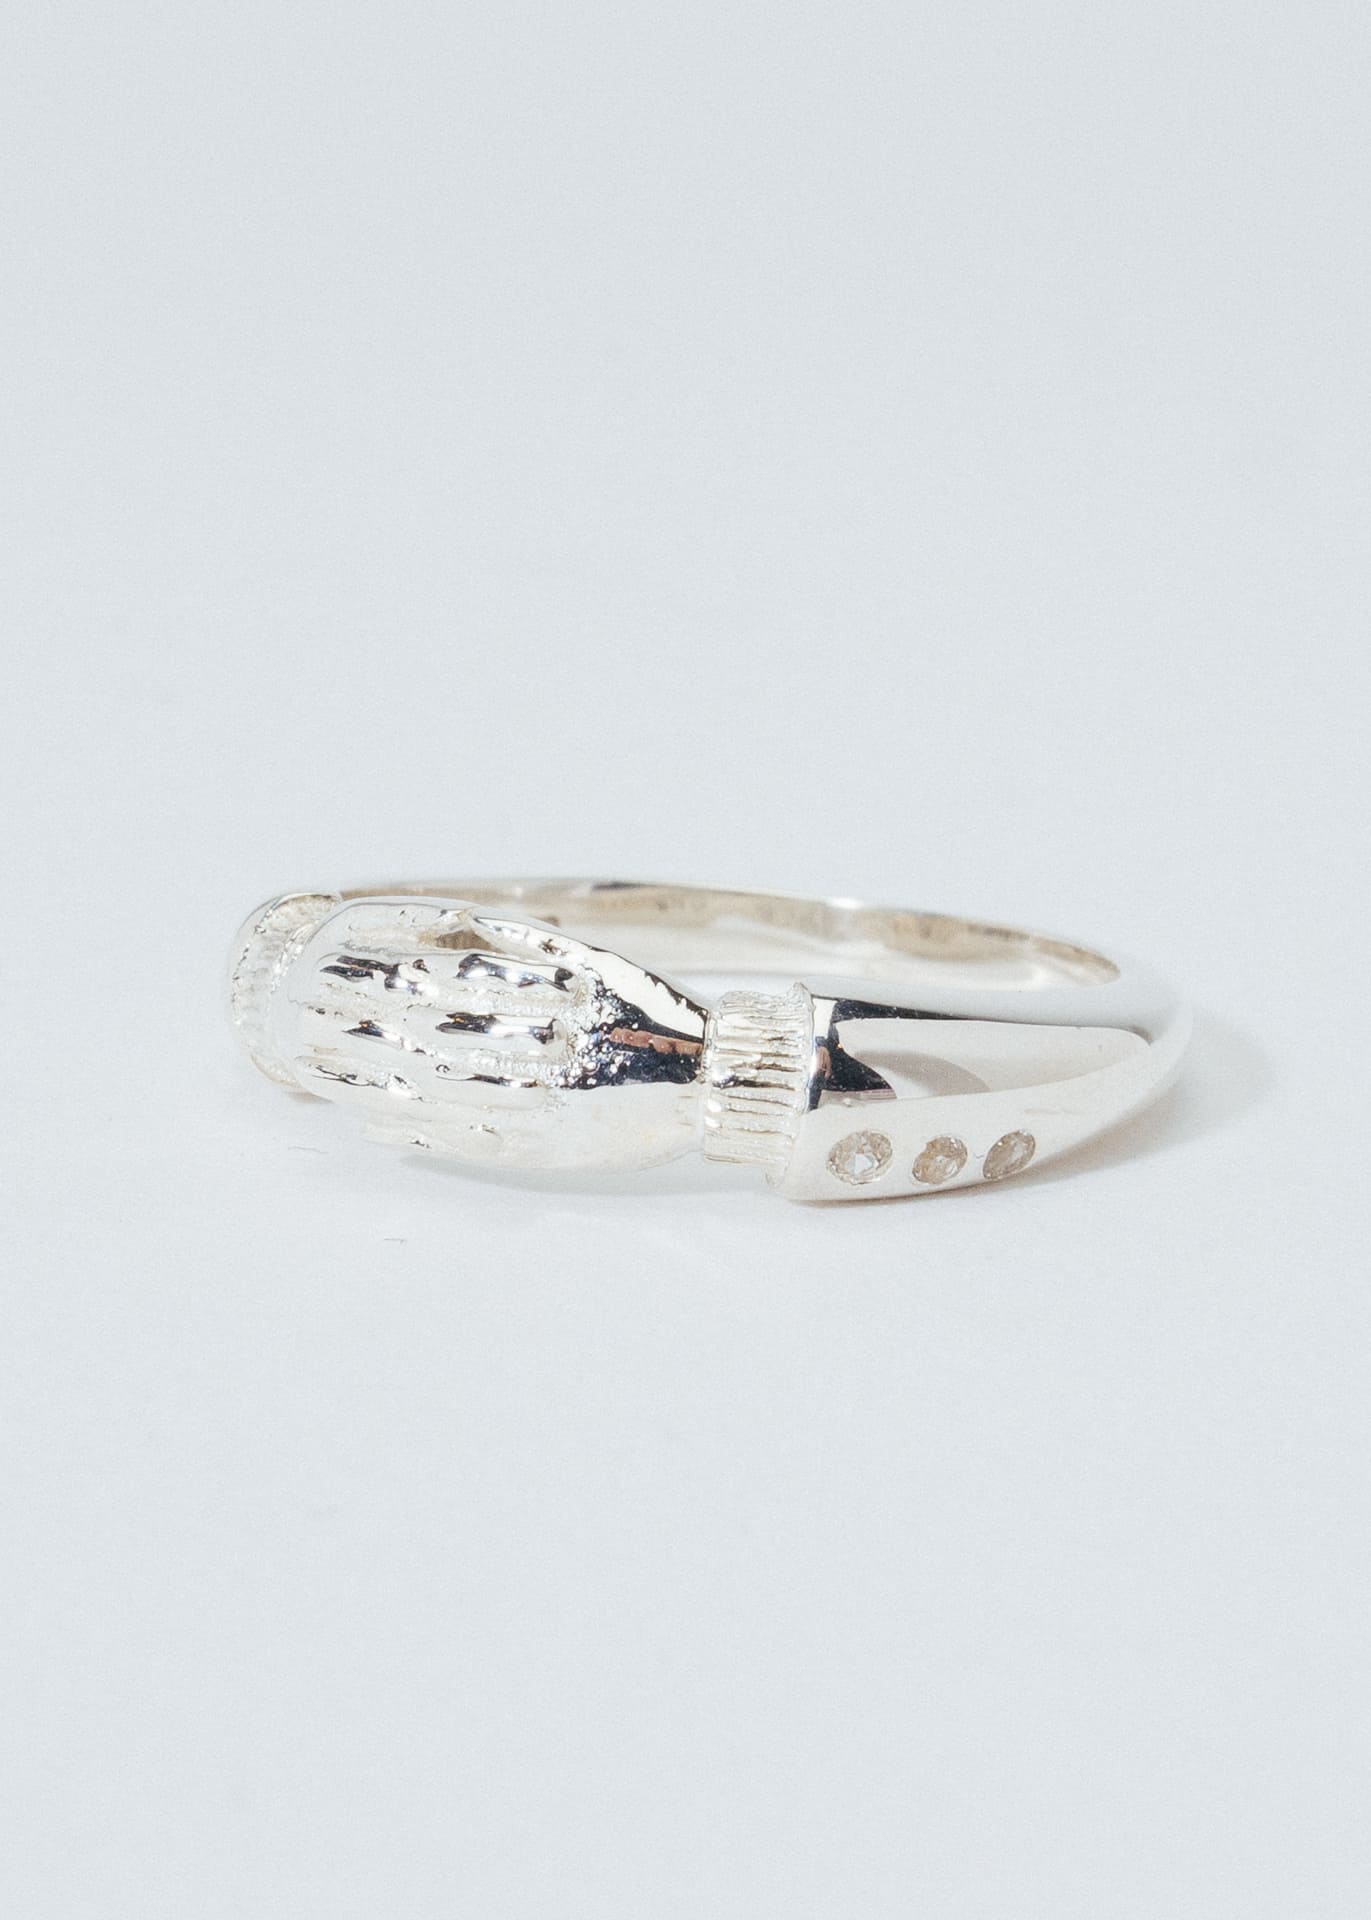 B213_Hands Of Thought Ring_L_03